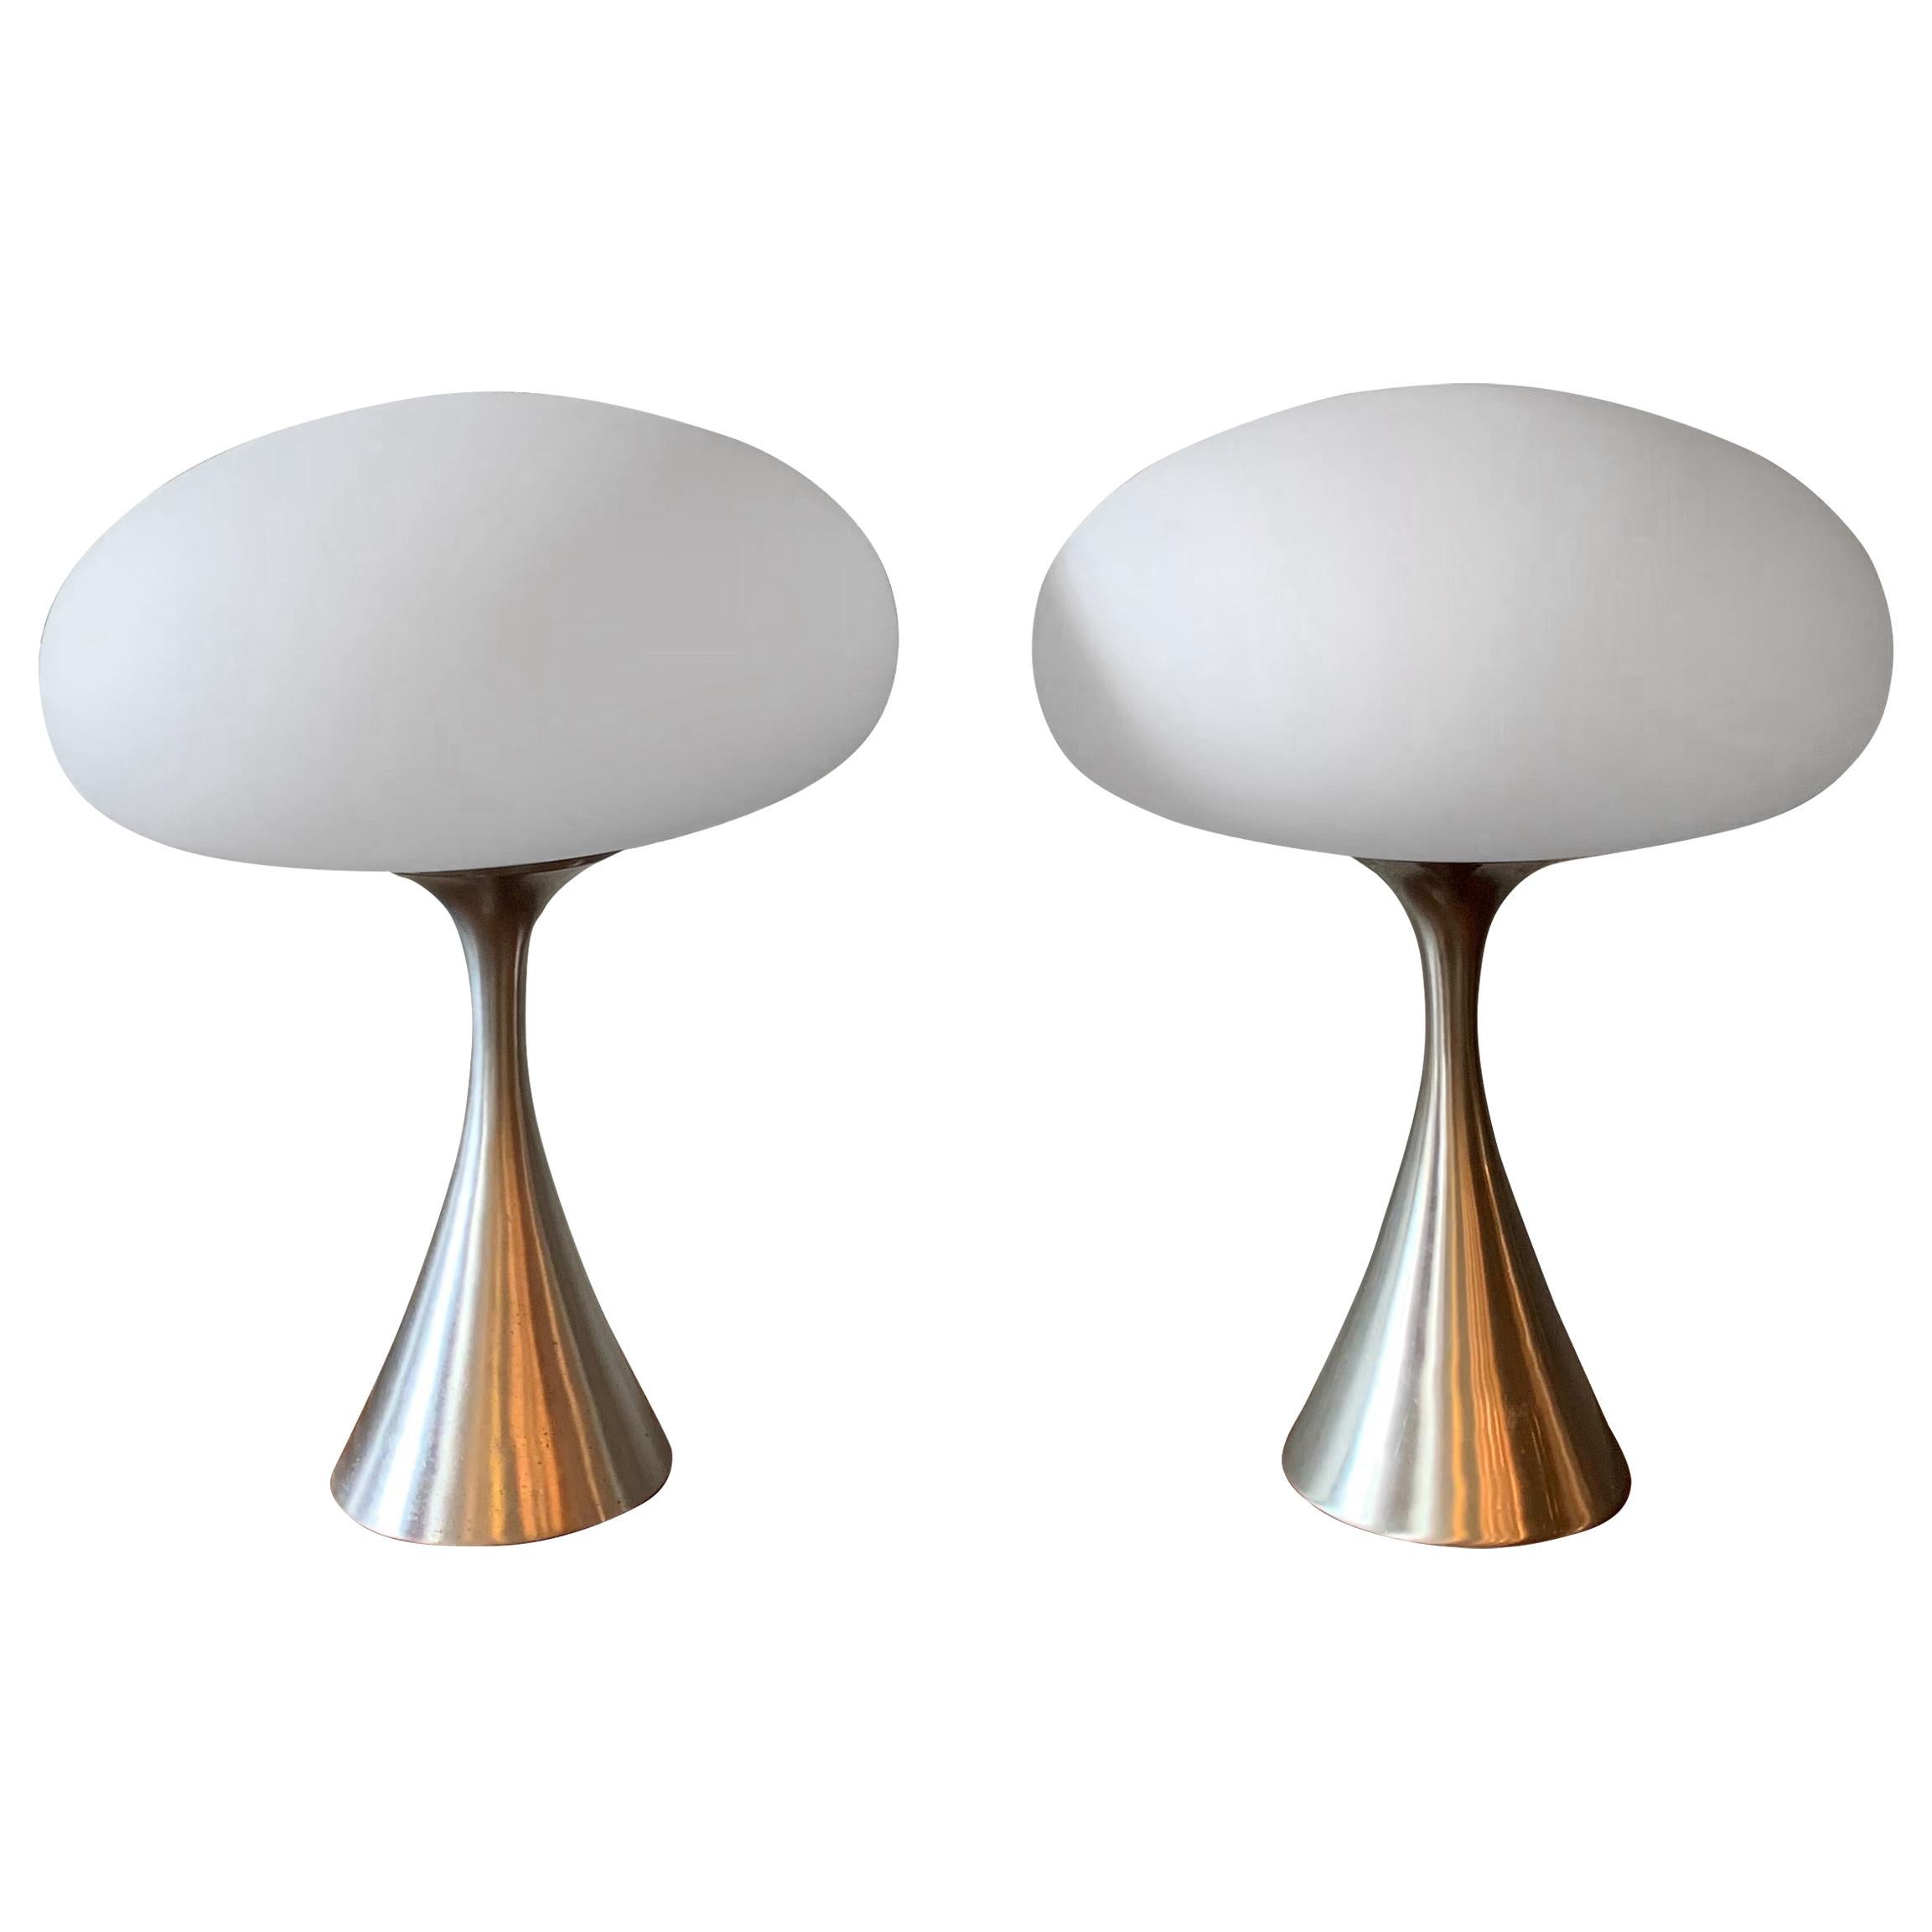 Pair of Brushed Aluminum Mushroom Table Lamps by Bill Curry for Laurel